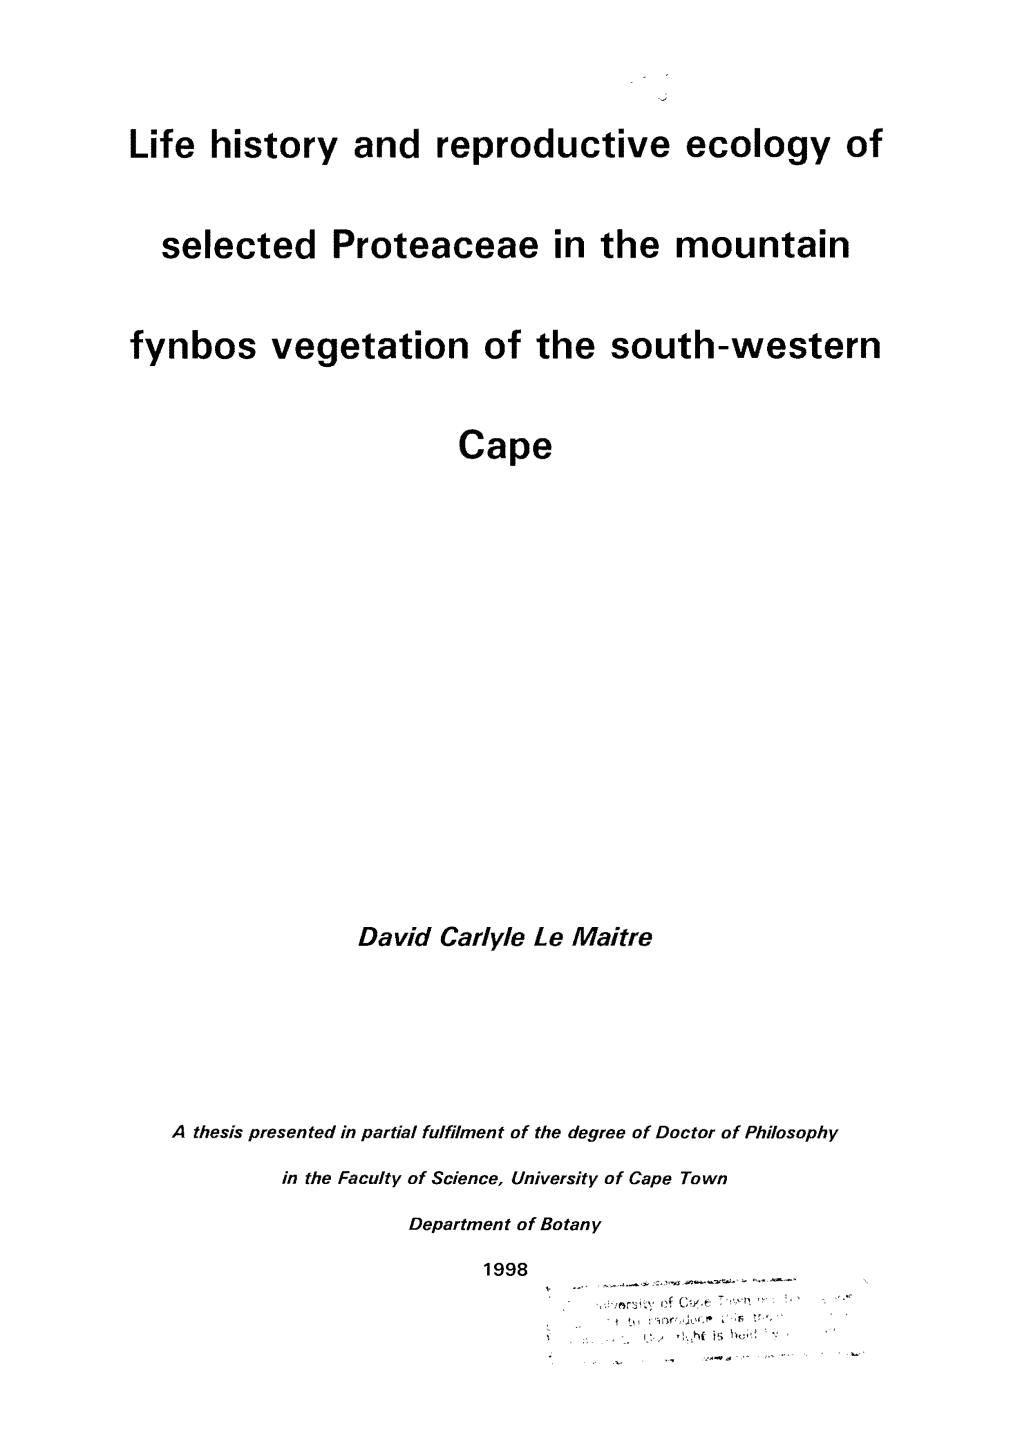 Life History and Reproductive Ecology of Selected Proteaceae in The